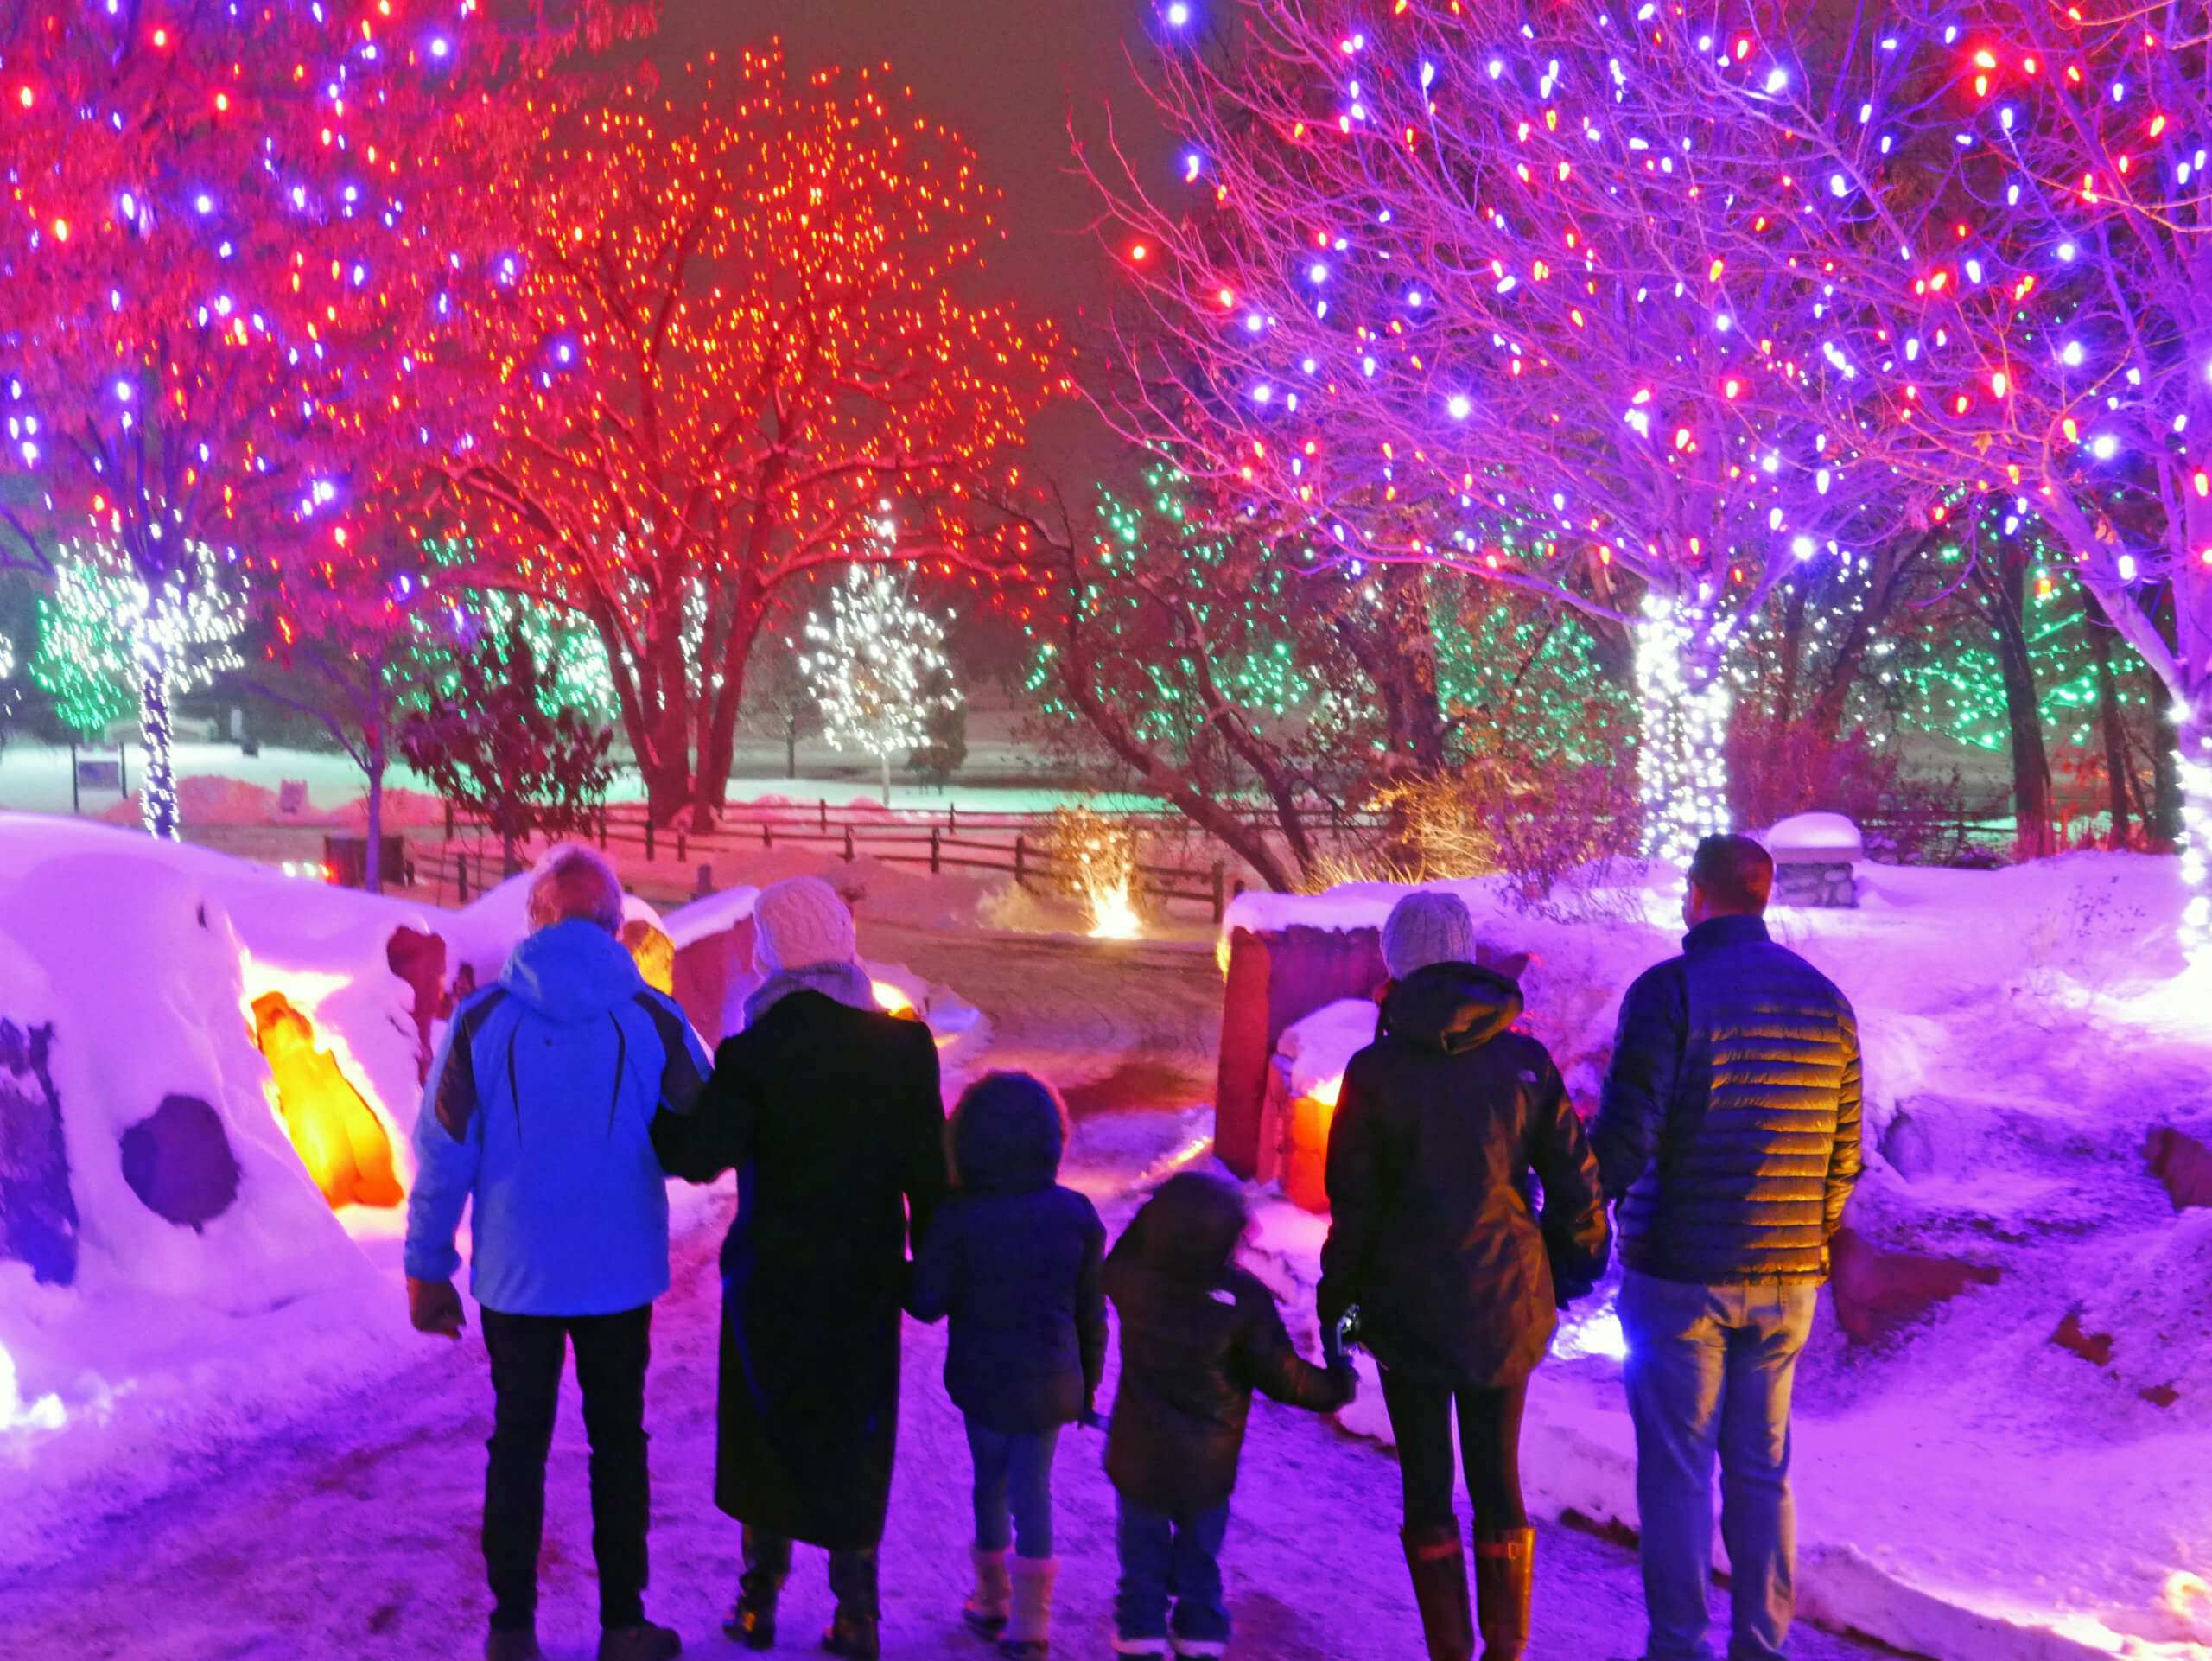 A family holds hands while walking through a pathway framed by purple, silver, pink, red, and green holiday lights.